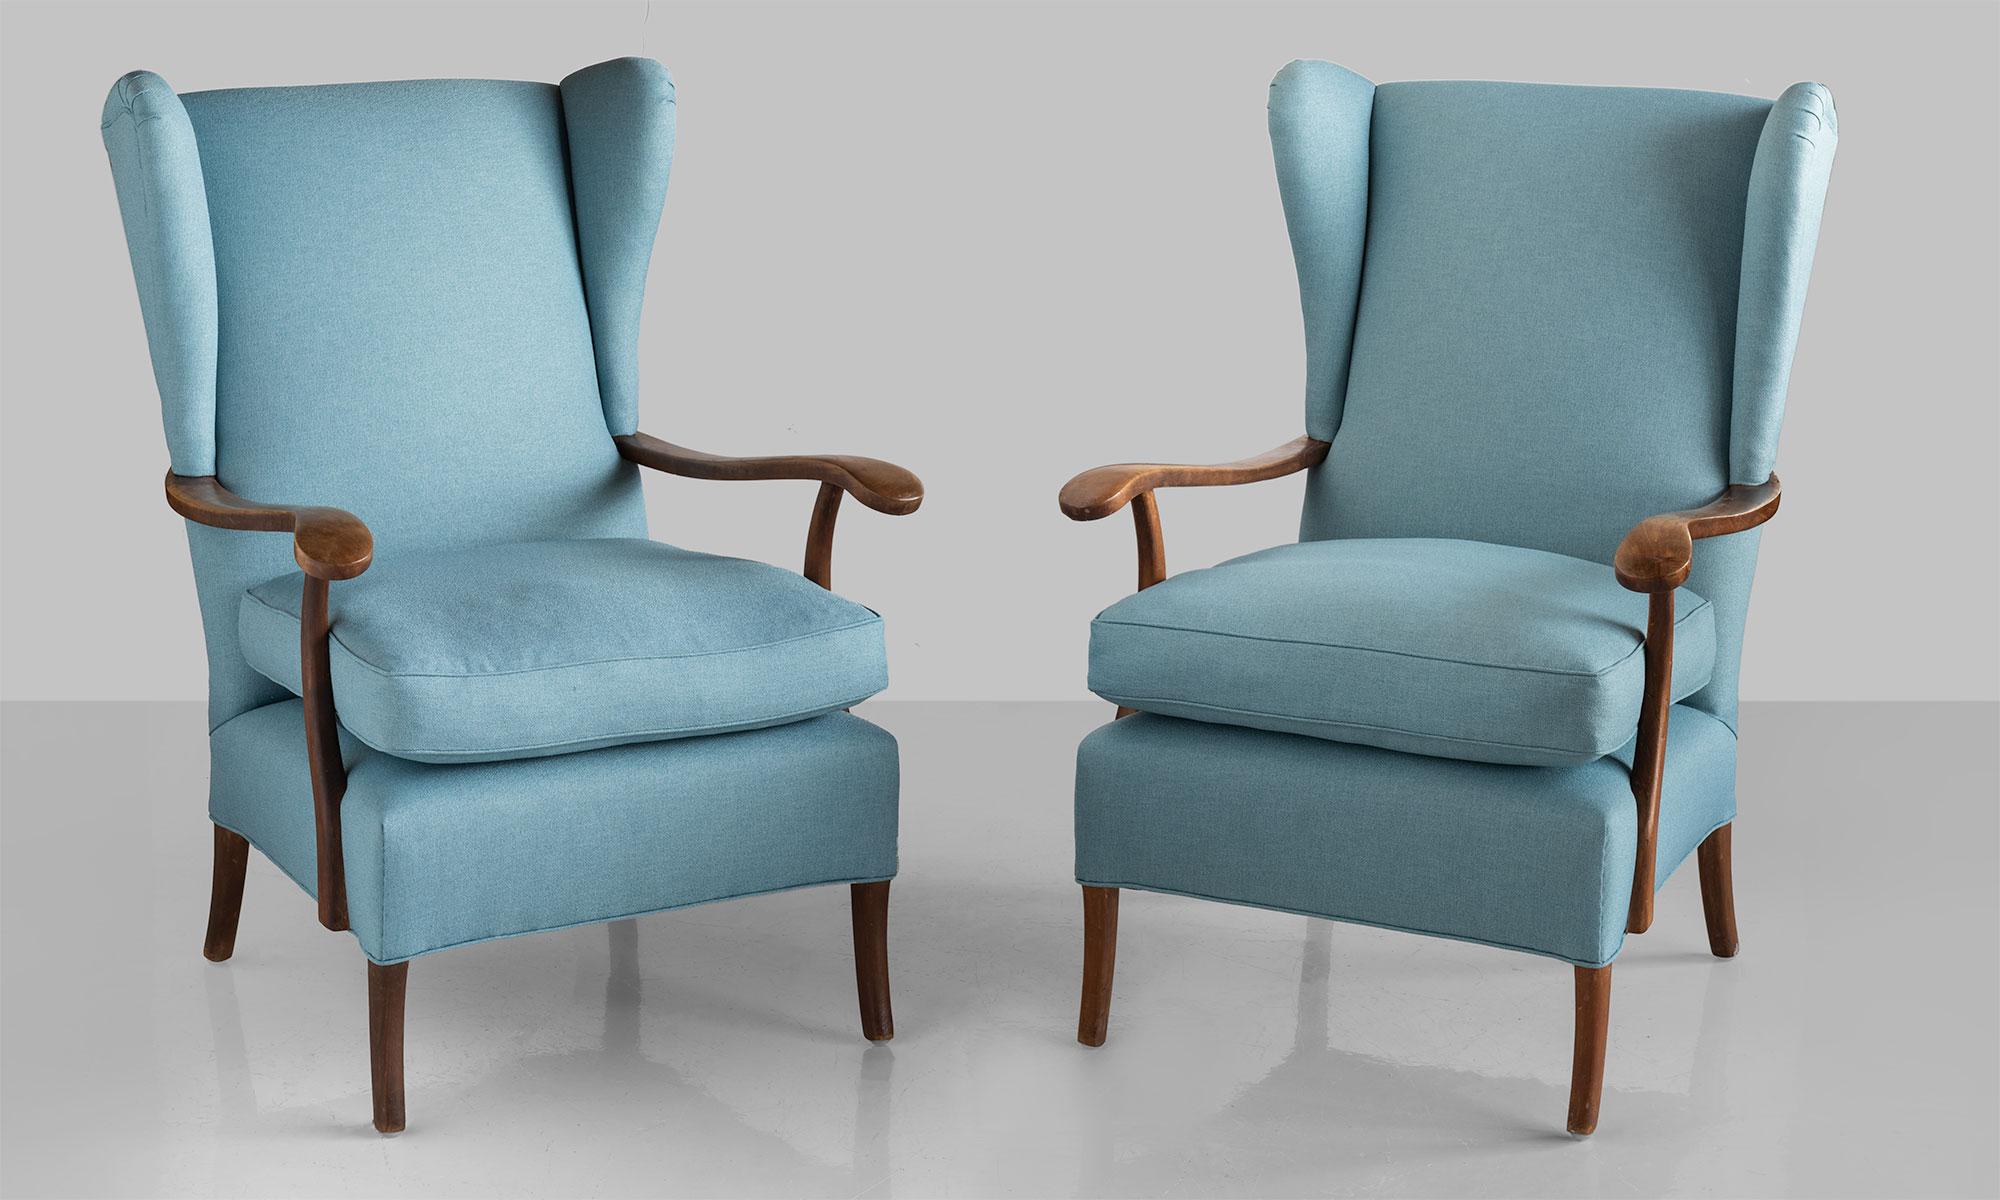 Pair of Paolo Buffa armchairs, Italy, circa 1950.

Modern wingback armchairs with carved wooden arms, newly reupholstered in Maharam Fabric.